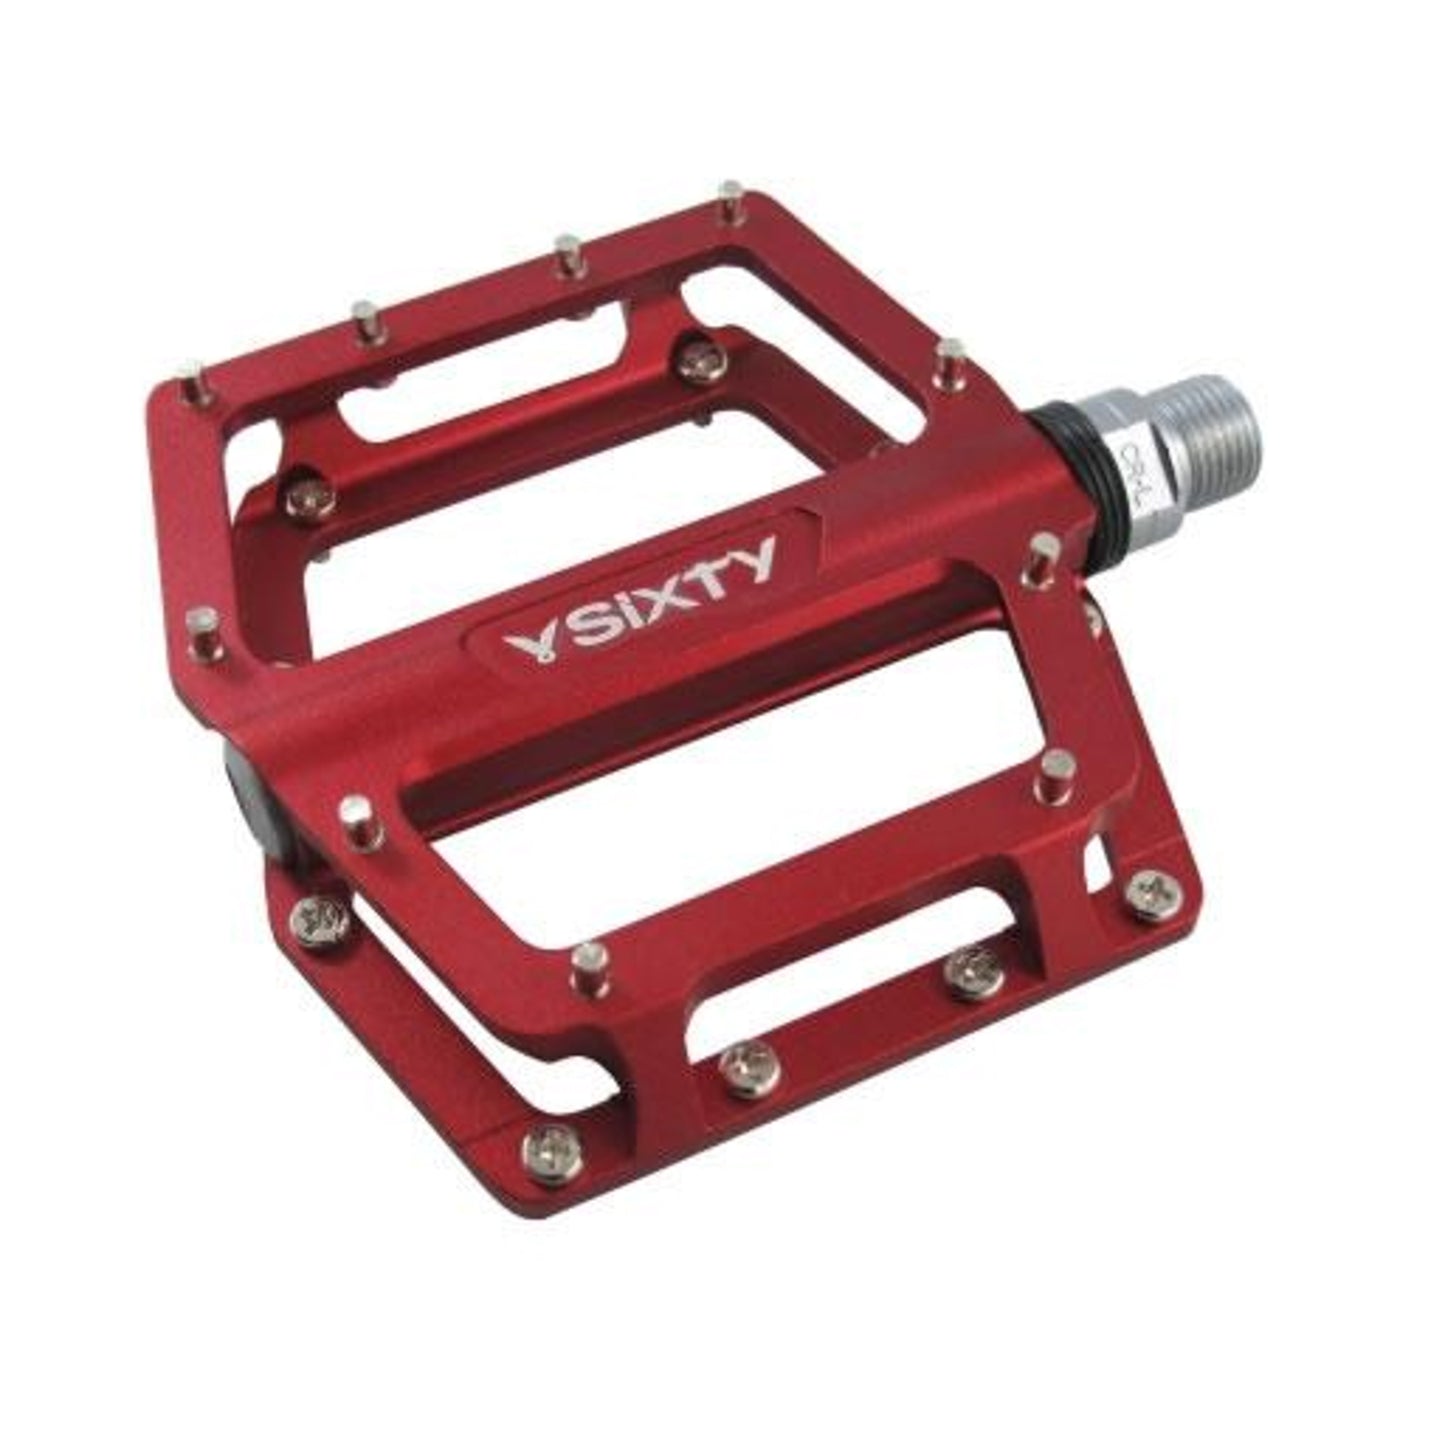 V-Sixty B184 Pedals